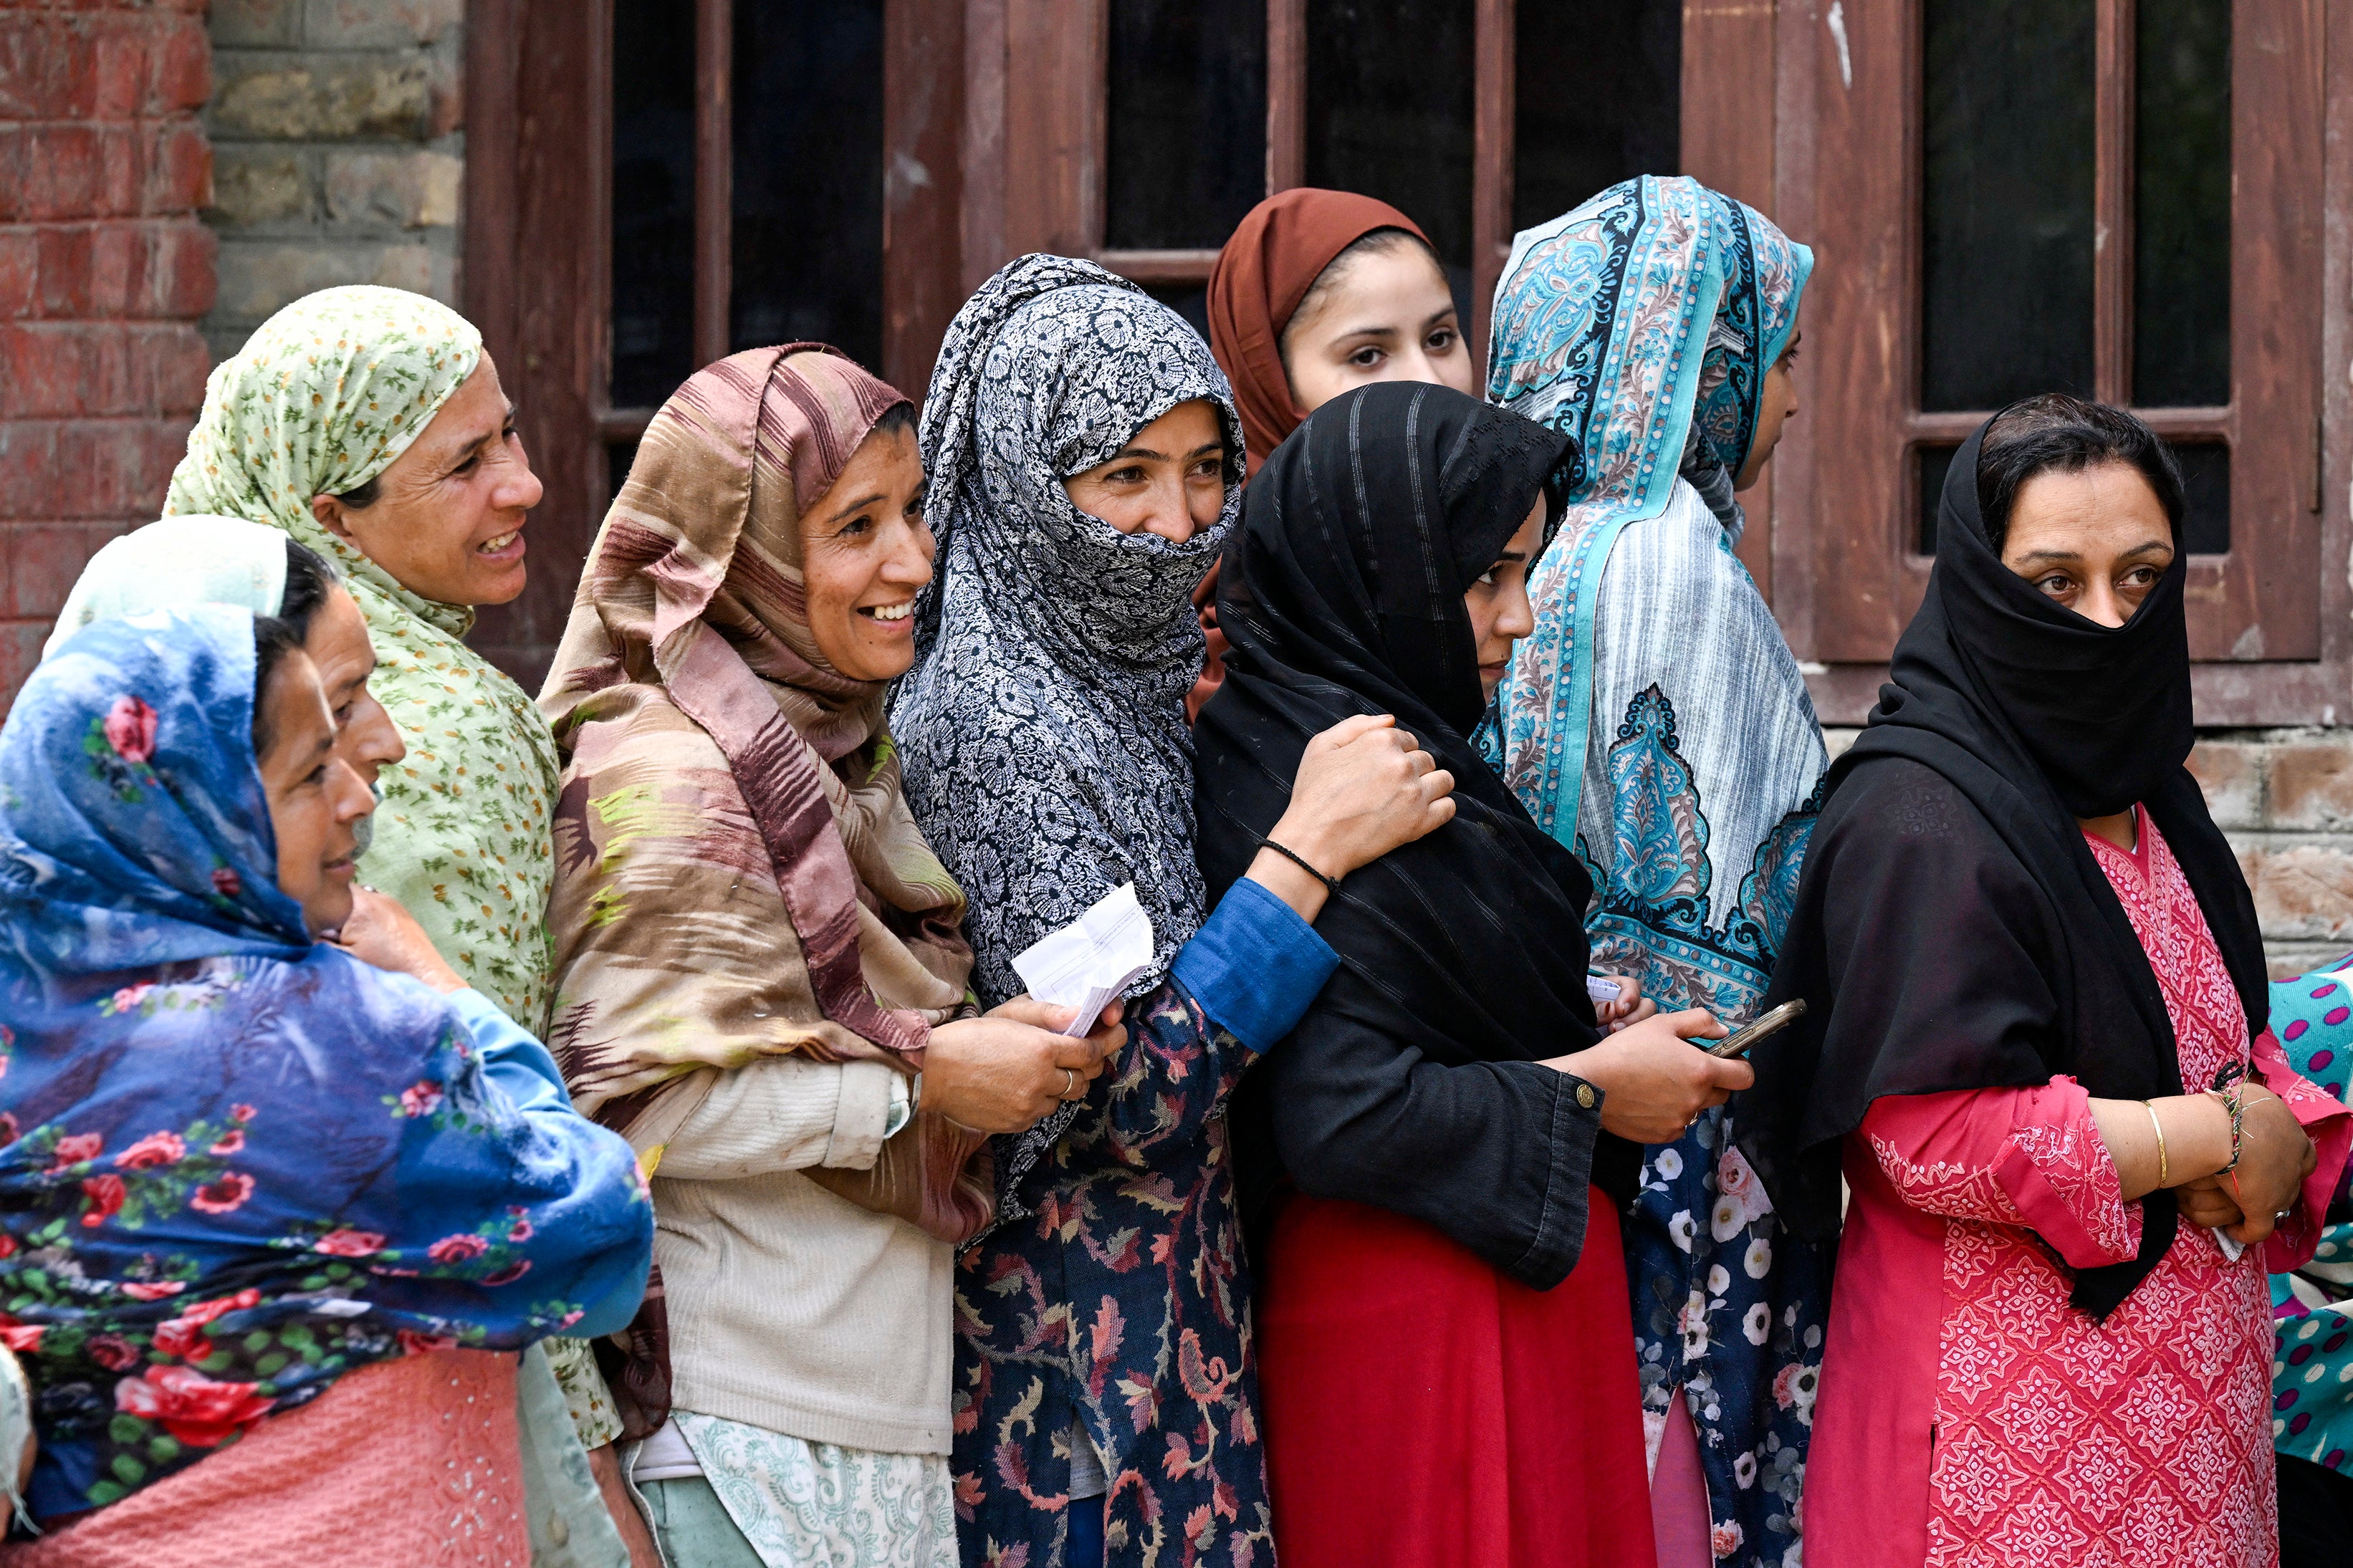 Voters queue up to cast their ballots at a polling station during the fourth phase of voting in India’s general election, in Srinagar